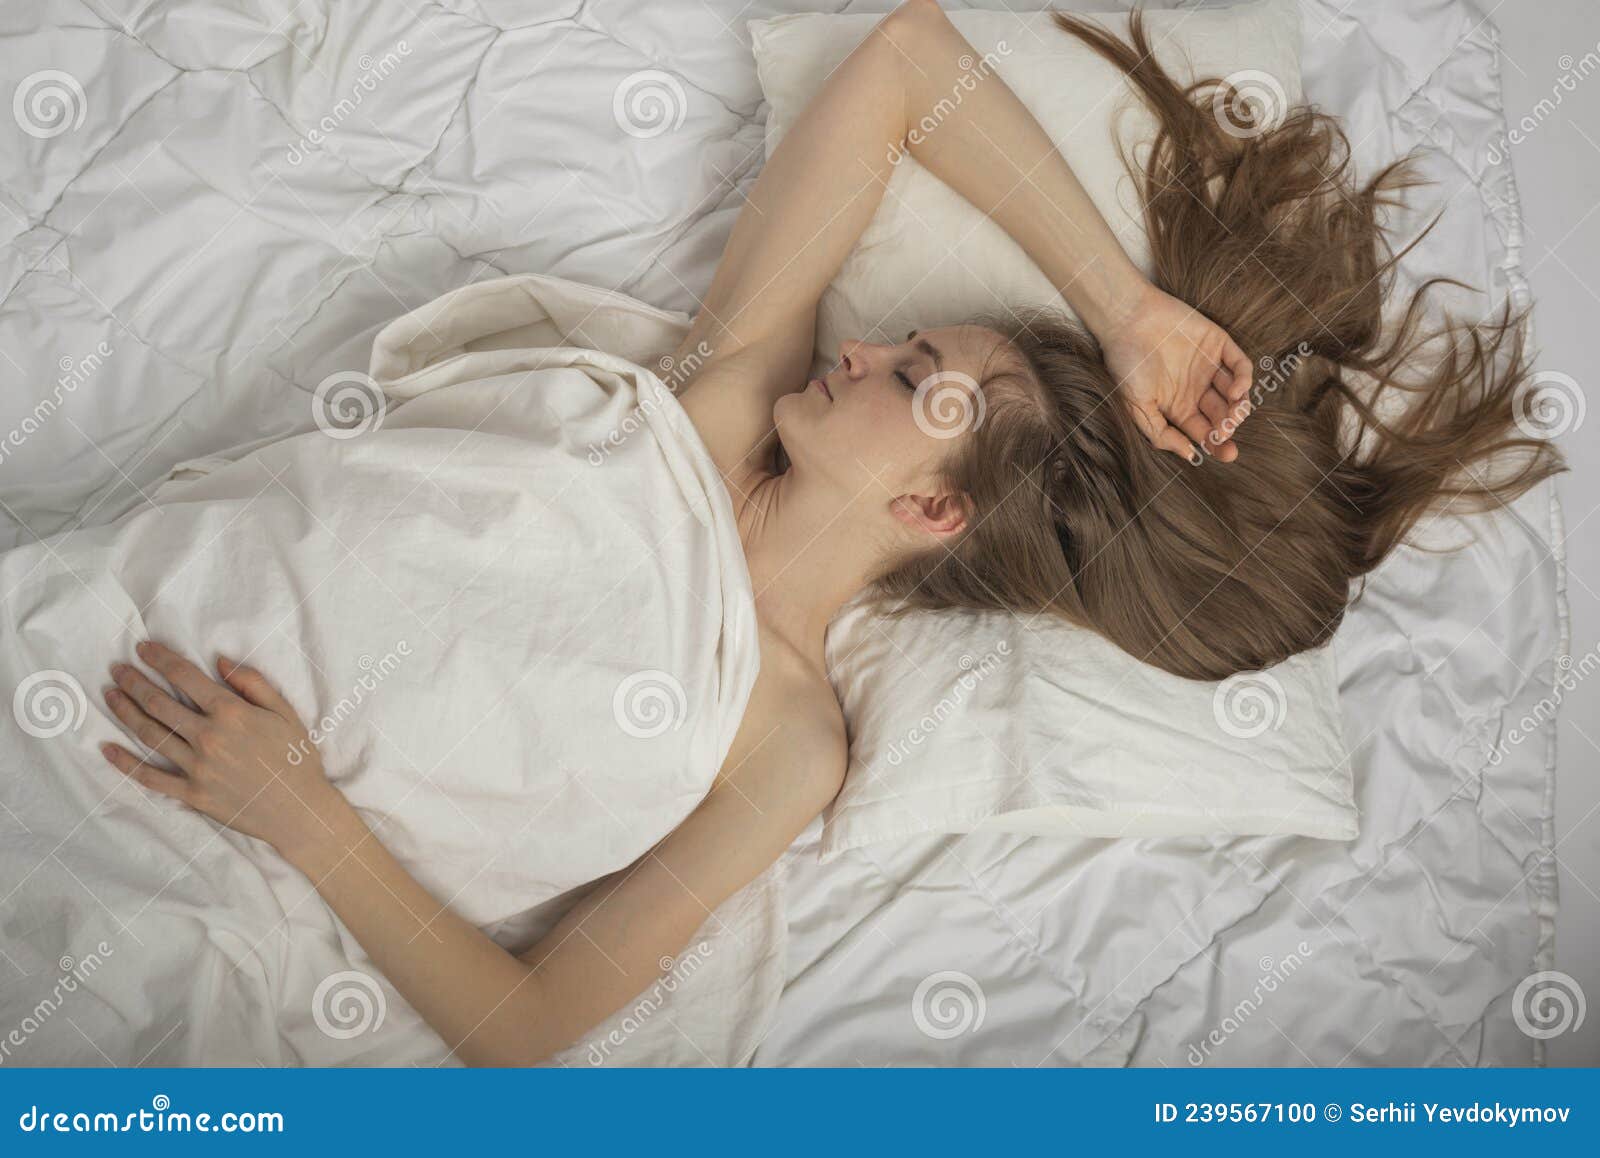 beautiful young woman with long hair sleeps soundly on expensive bed linen. portrait of sleeping girl top view